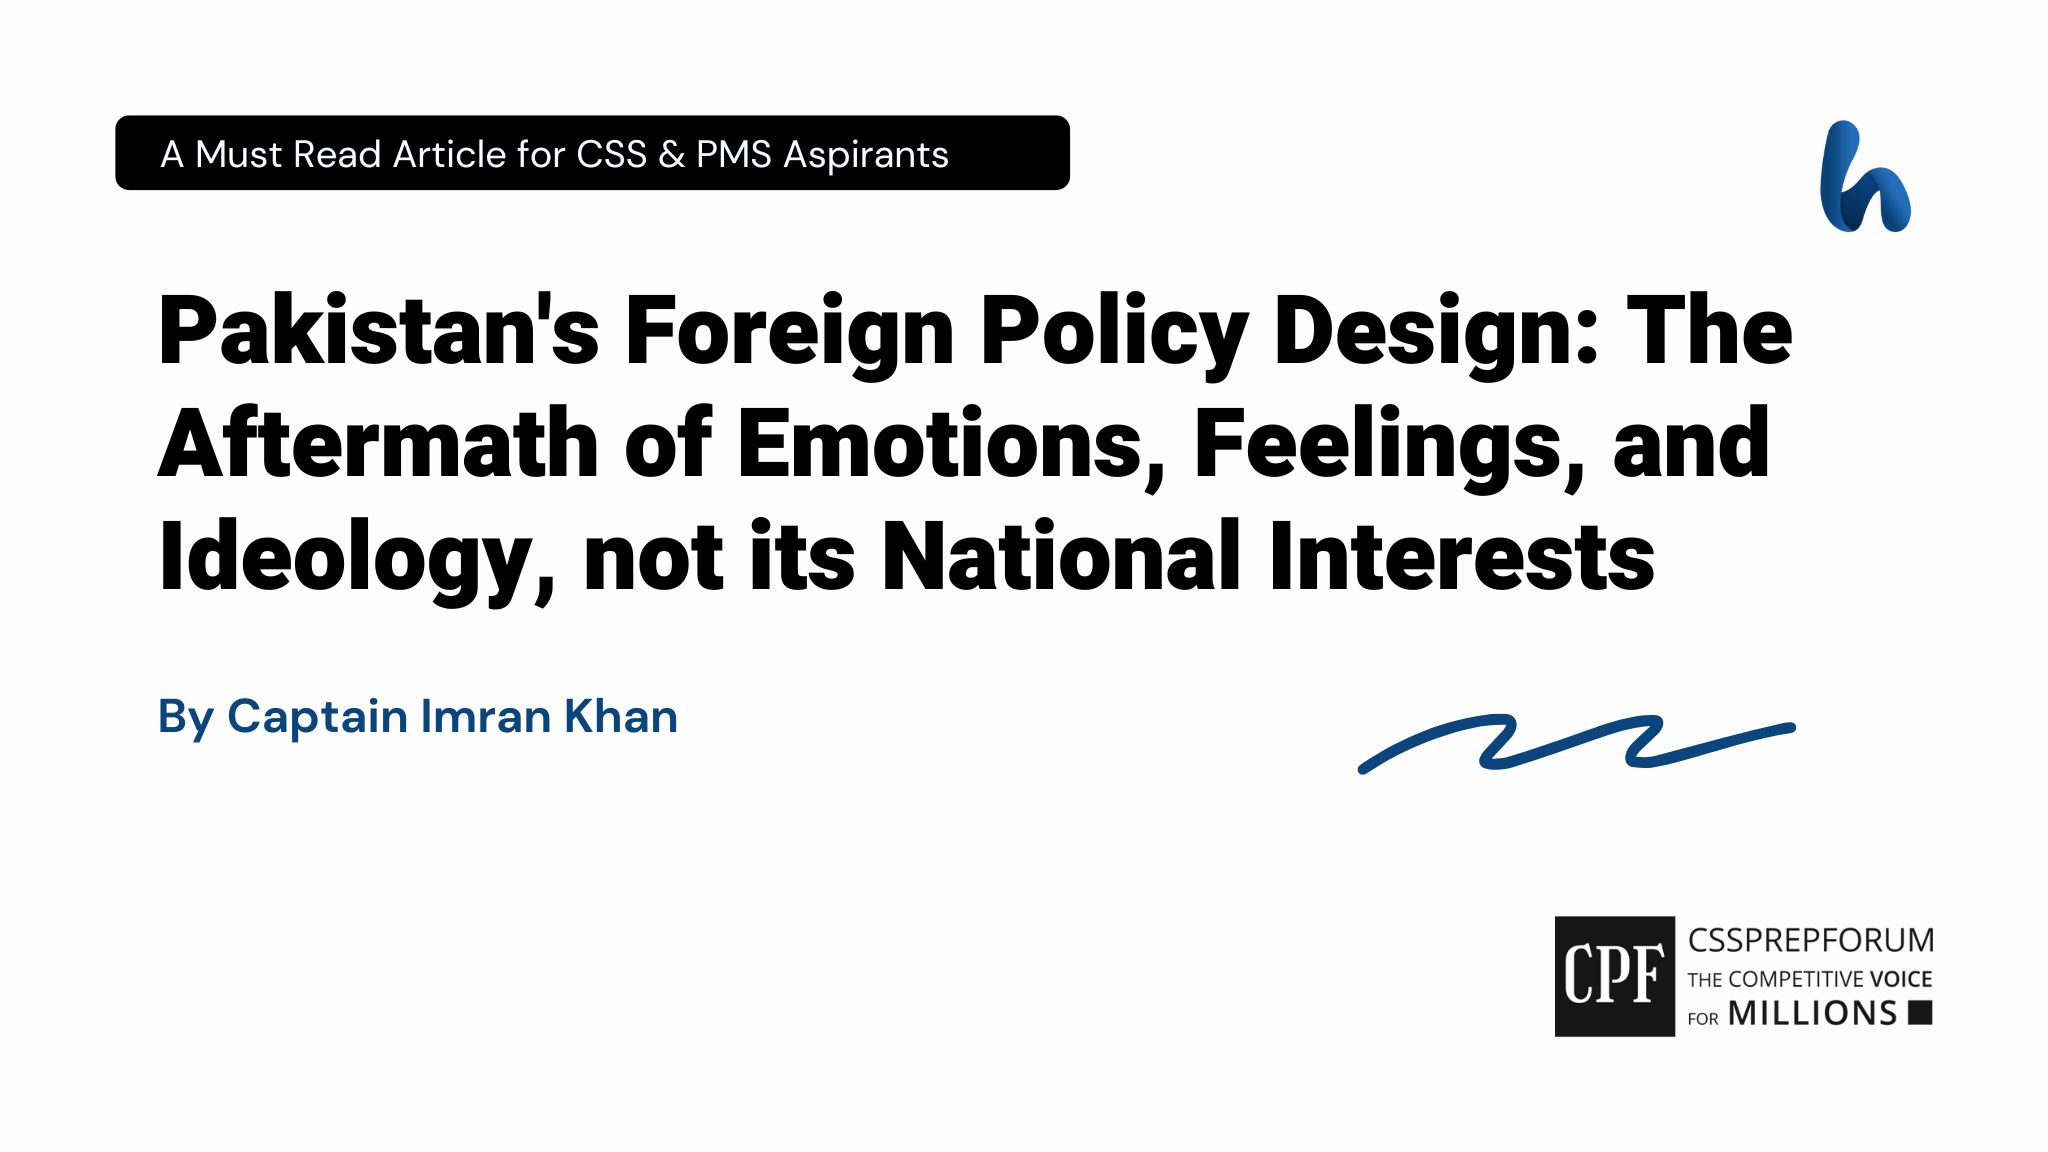 Pakistan's Foreign Policy Design: The Aftermath of Emotions, Feelings, and Ideology, not its National Interests by Captain Imran Khan